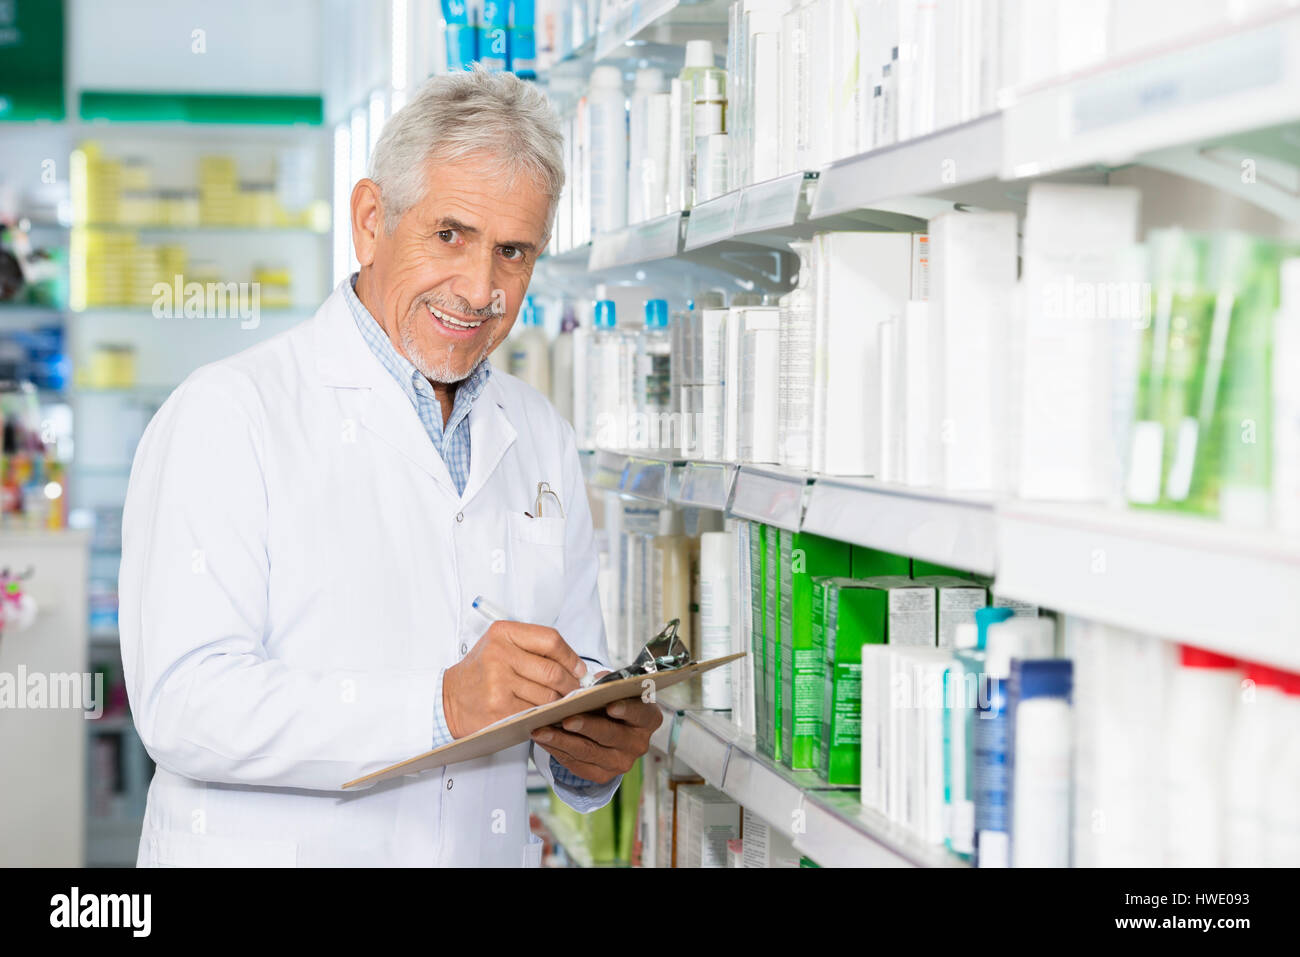 Smiling Chemist Writing On Clipboard While Standing By Shelves Stock Photo